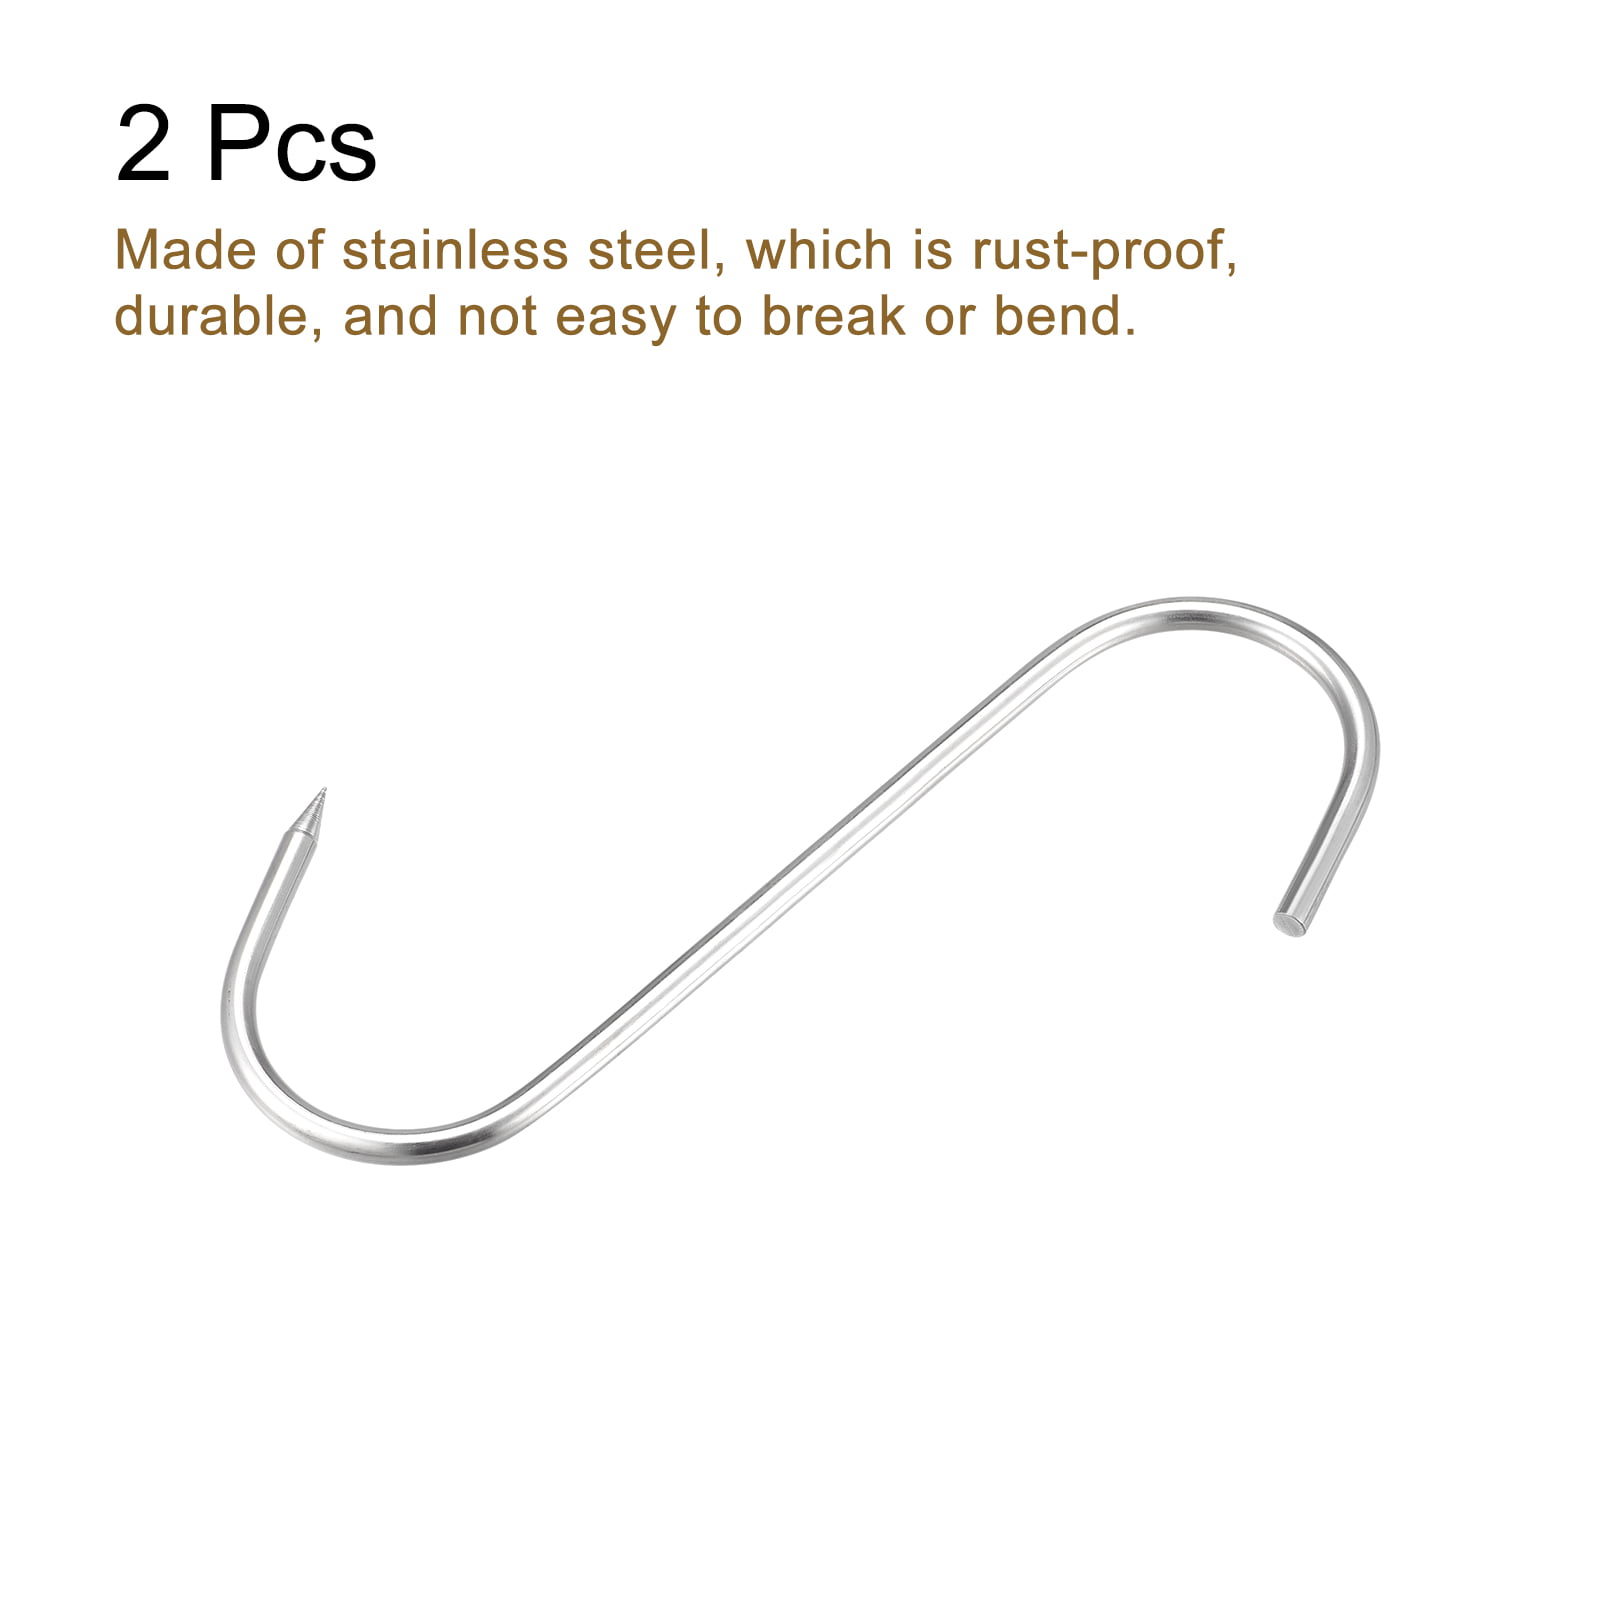 6 x 6" Butcher Meat Hook 150mm S-Hook Hard Stainless Quality Food 